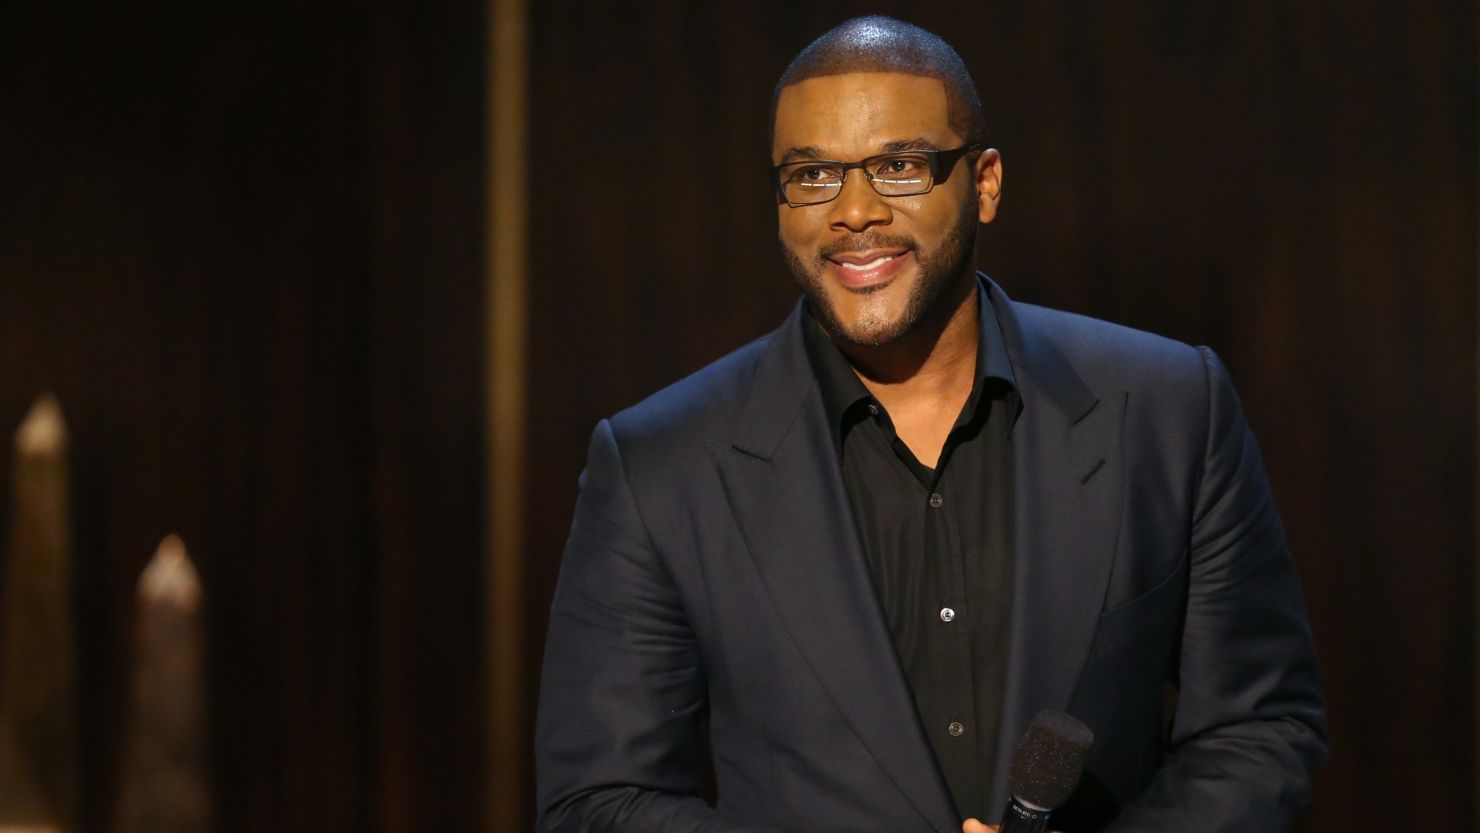 Tyler Perry onstage at Spike TV's "Eddie Murphy: One Night Only" at the Saban Theatre on in 2012 in Beverly Hills, California.